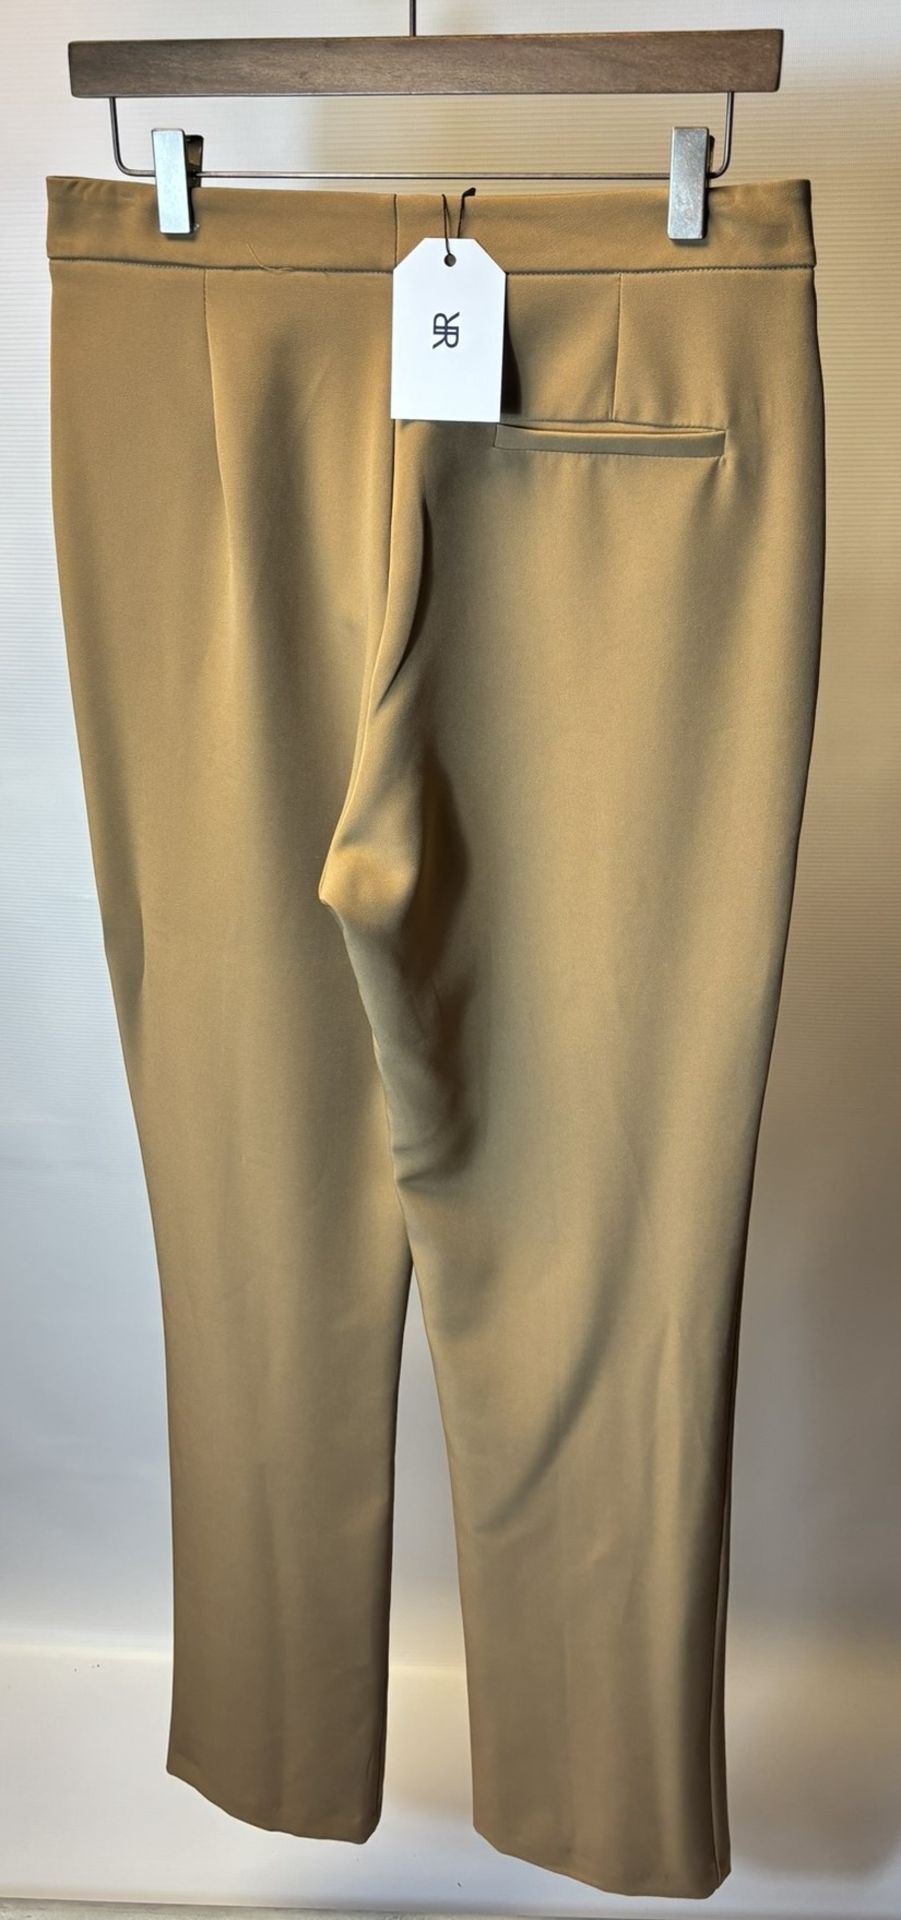 15 x Various Pairs Of Women's Trousers As Seen In Photos - Image 41 of 45